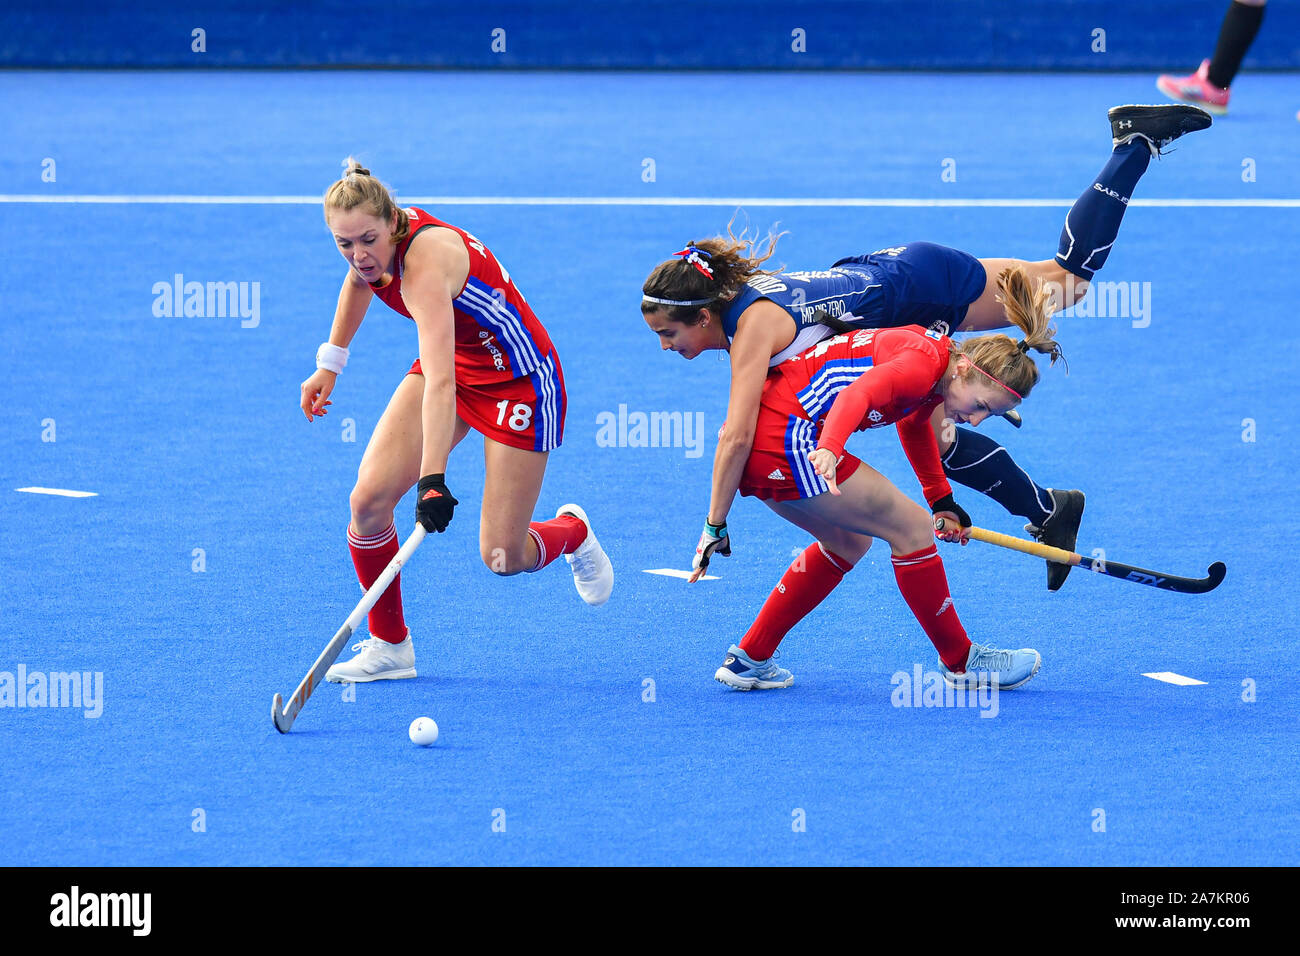 London, UK. 03th Nov, 2019. Ansley Giselle of Great Britain (left) in action during FIH Olympic Qualifiers match: Great Britain vs Chile (Women) at Lea Valley Hockey and Tennis Centre on Sunday, November 03, 2019 in LONDON ENGLAND. Credit: Taka G Wu/Alamy Live News Stock Photo